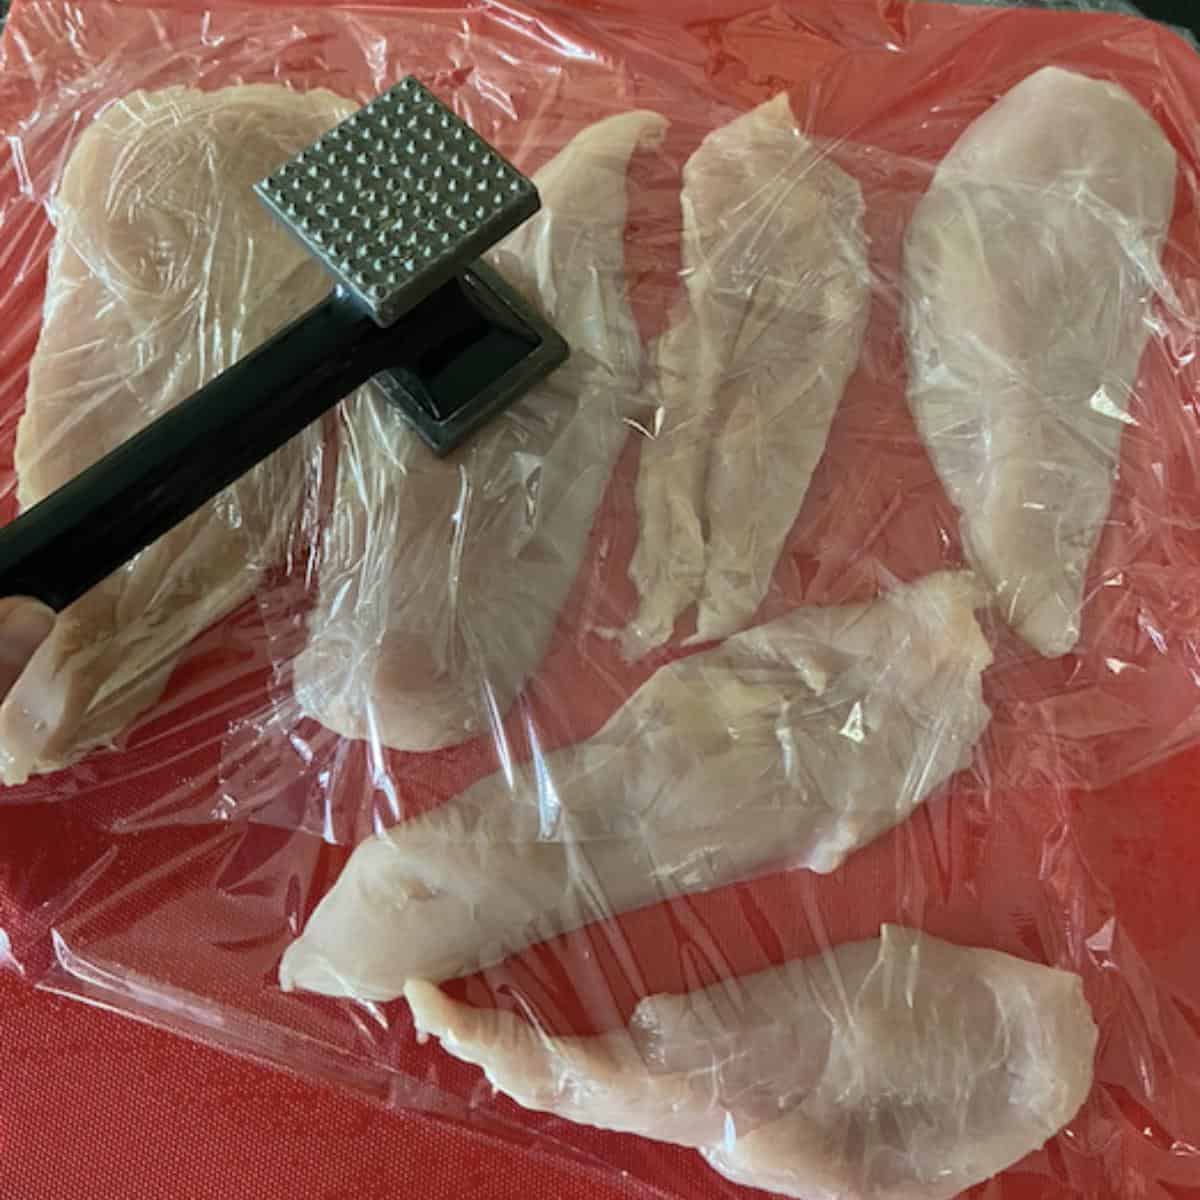 mallet pounding chicken breast on cutting board